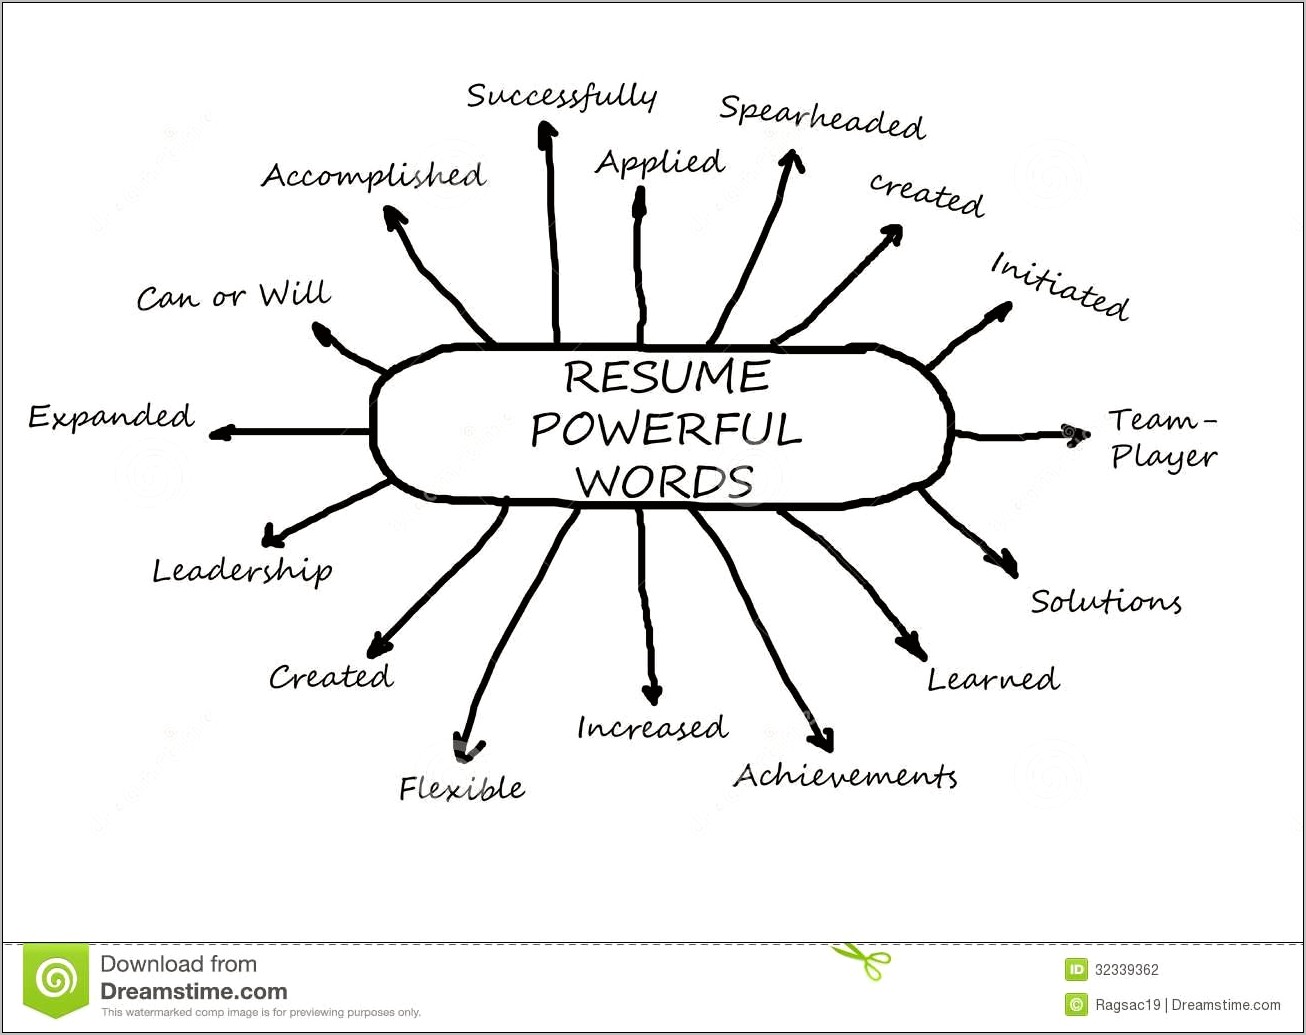 Key Action Words To Include In A Resume